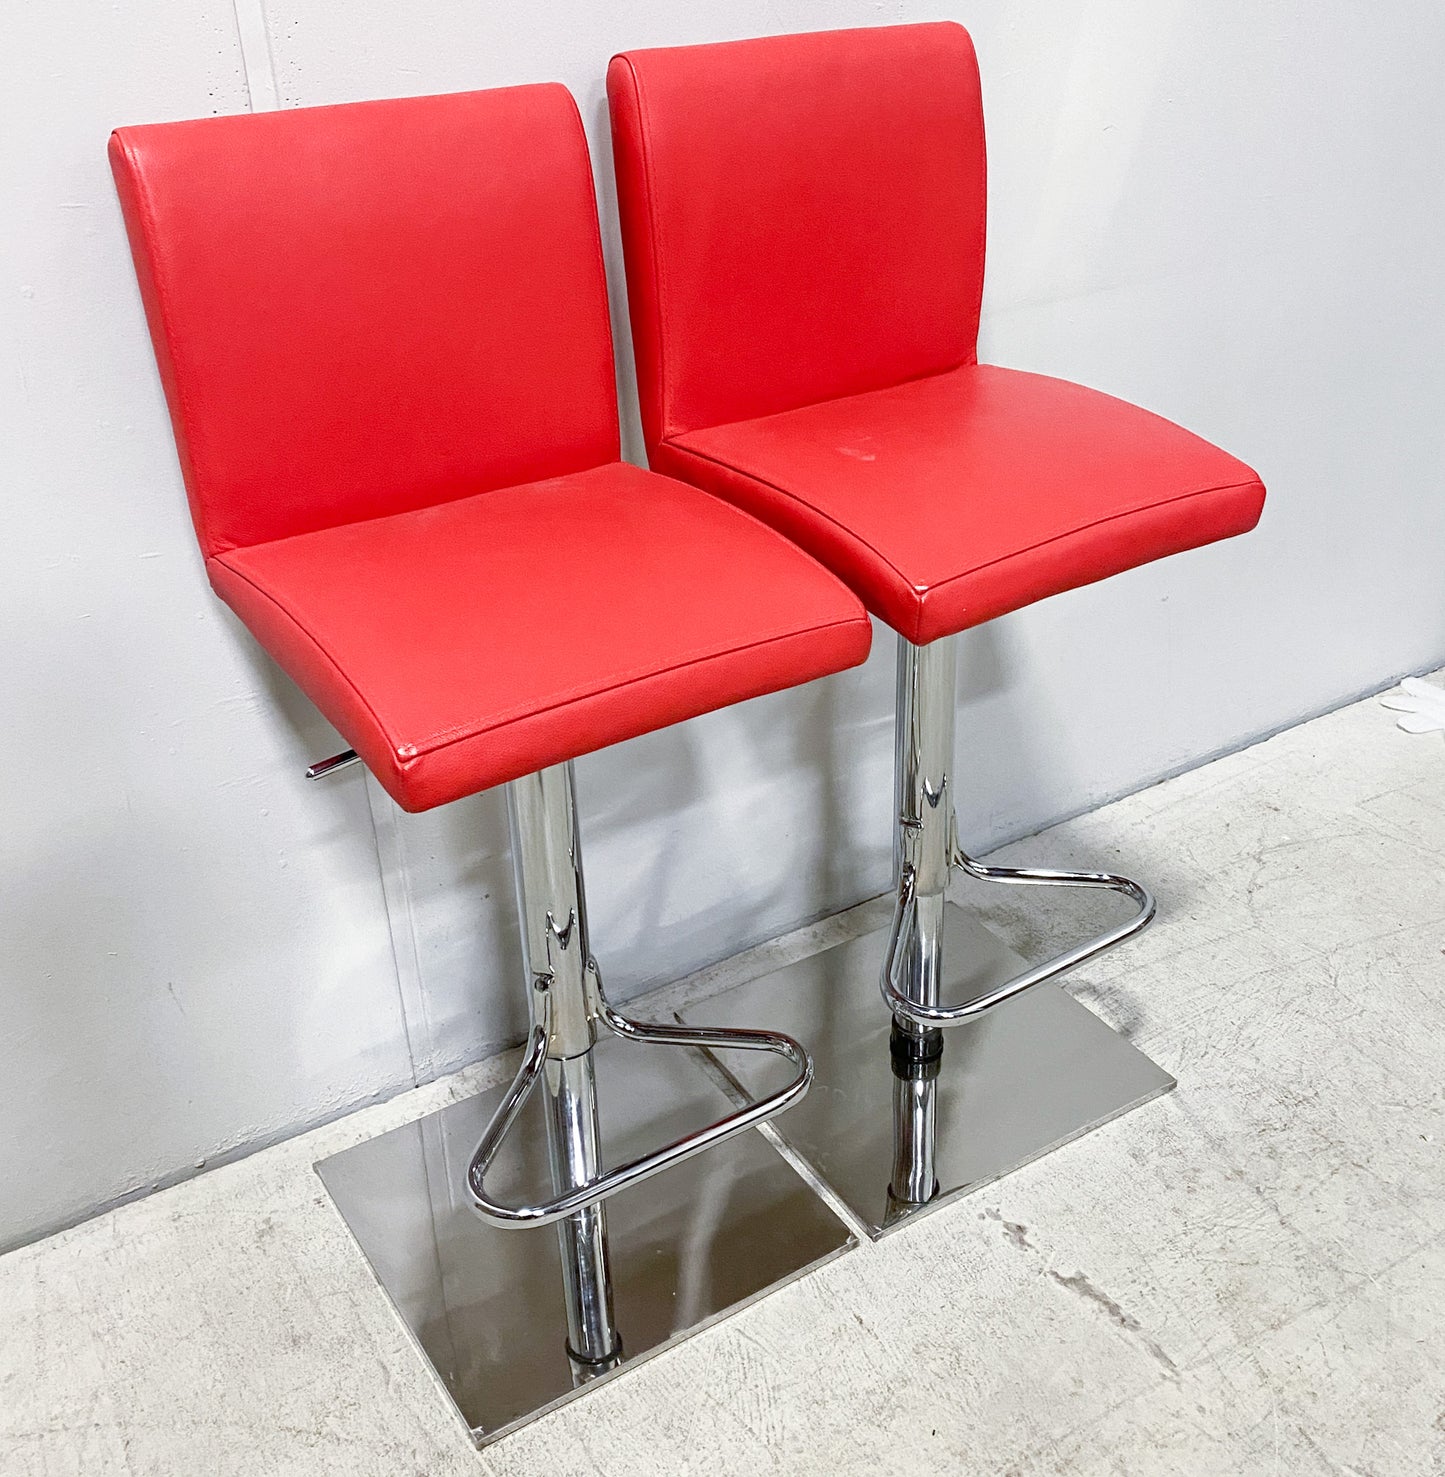 Modern Faux Red Leather and Chrome Hydraulic Barstools (Set of 2)